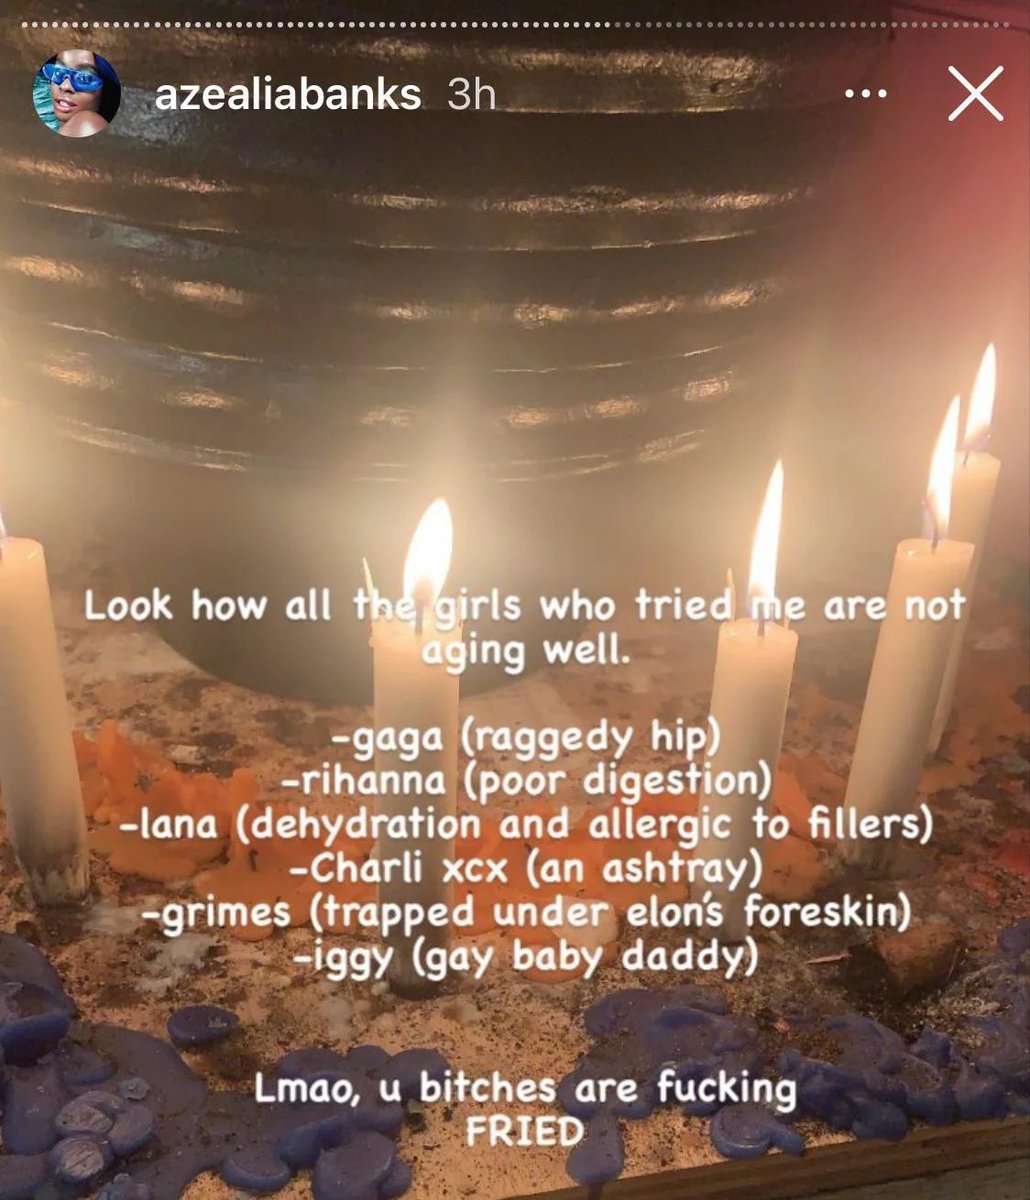 best azealia banks posts - heat - azealiabanks 3h .. Look how all the girls who tried me are not aging well. gaga raggedy hip rihanna poor digestion lana dehydration and allergic to fillers Charli xcx an ashtray grimes trapped under elon's foreskin iggy g